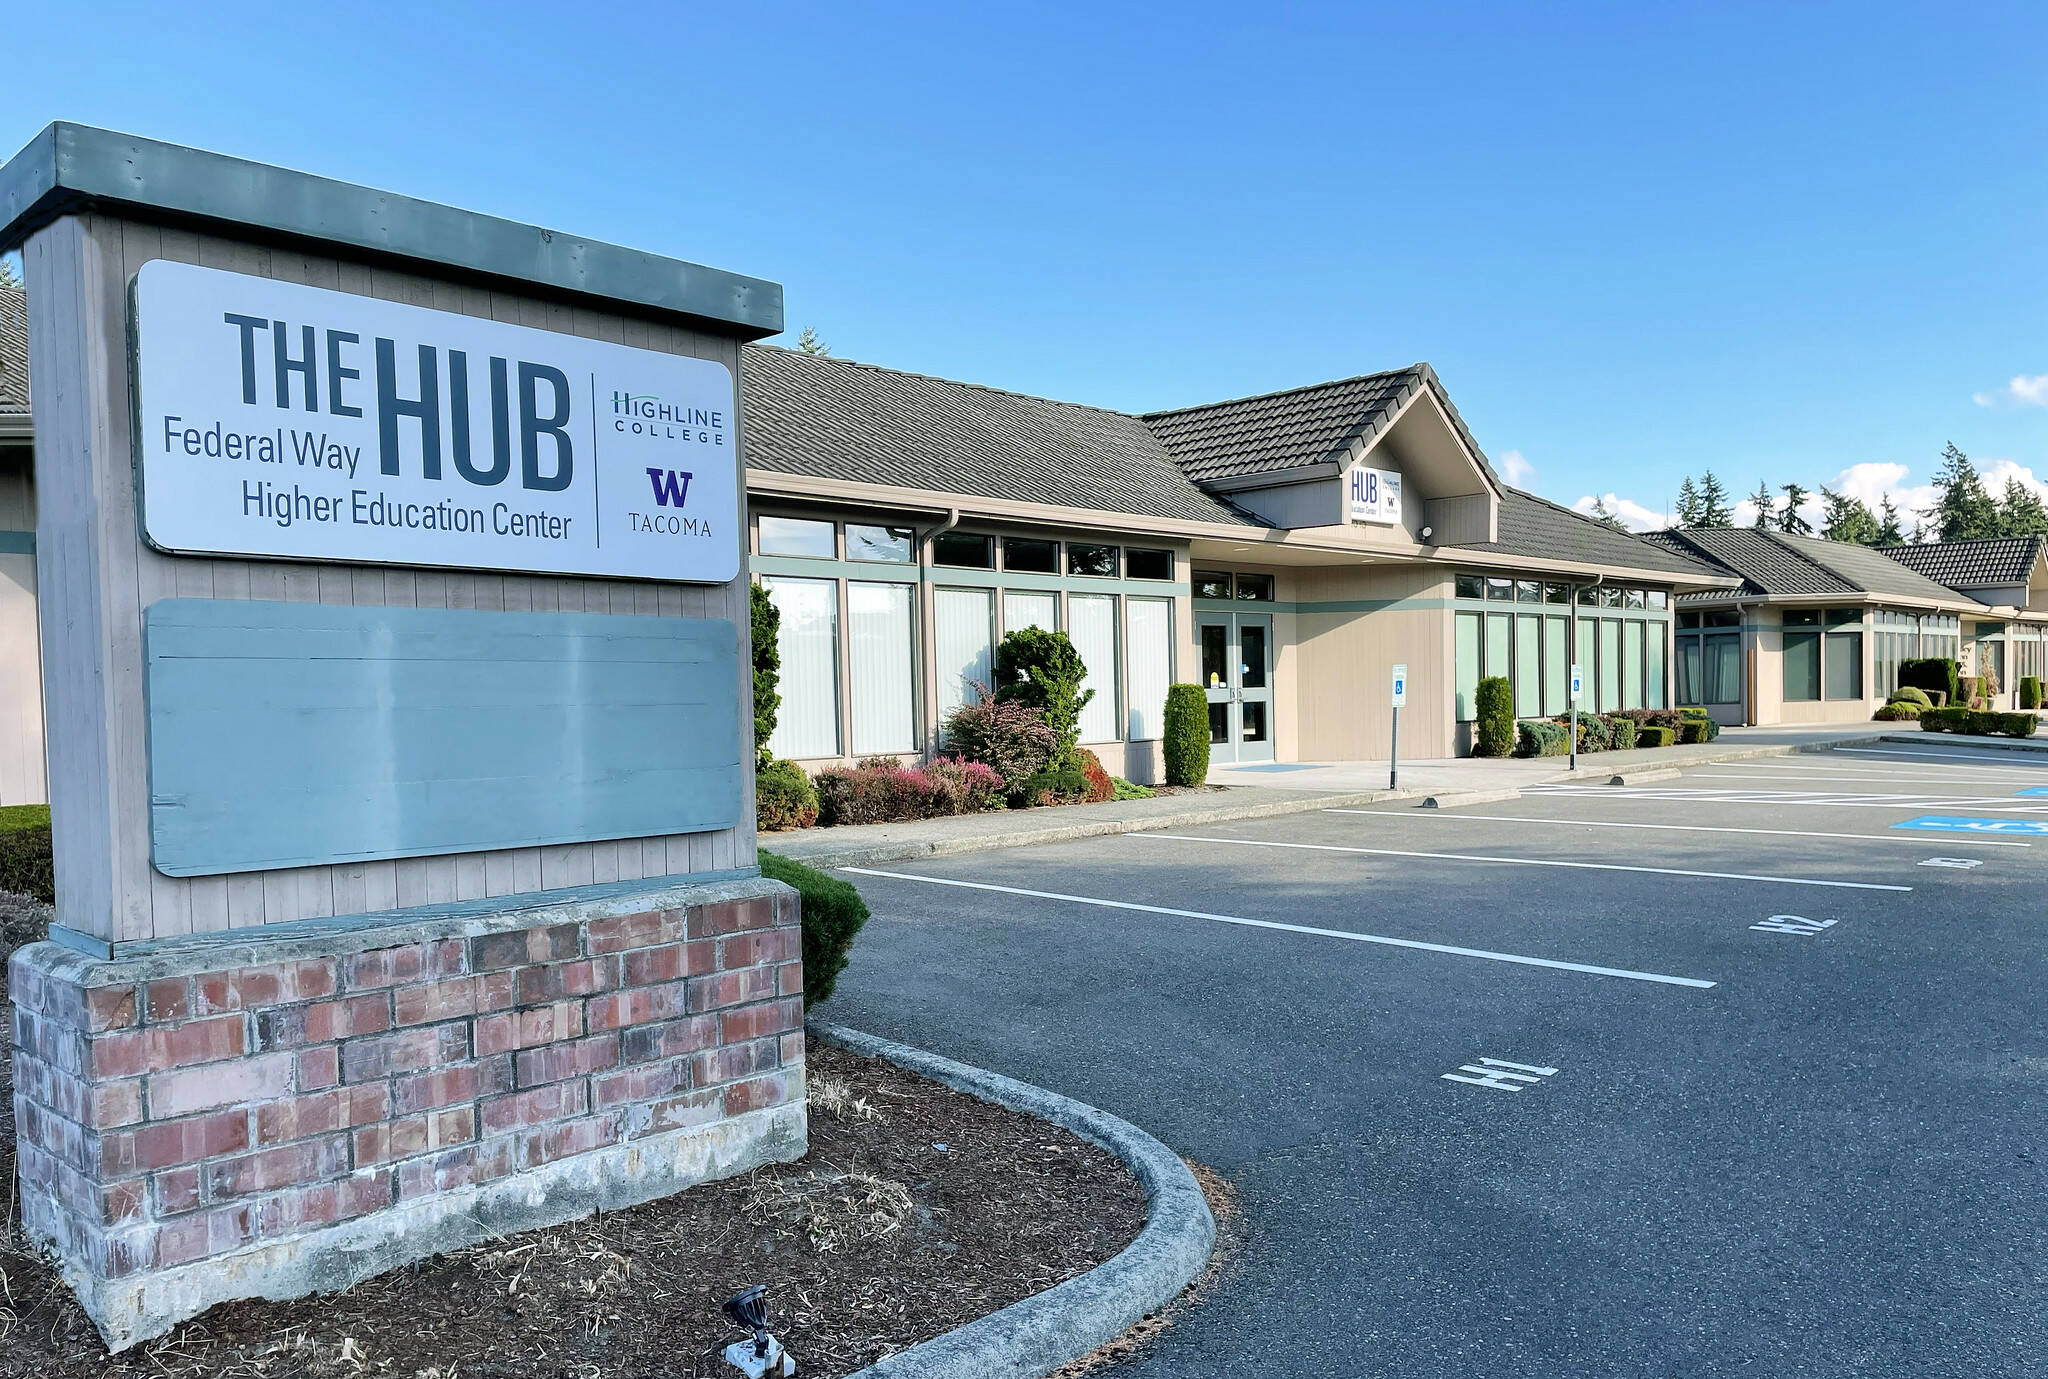 The Hub: Federal Way Higher Education Center is located at 1615 S. 325th Street in Federal Way. Courtesy photo